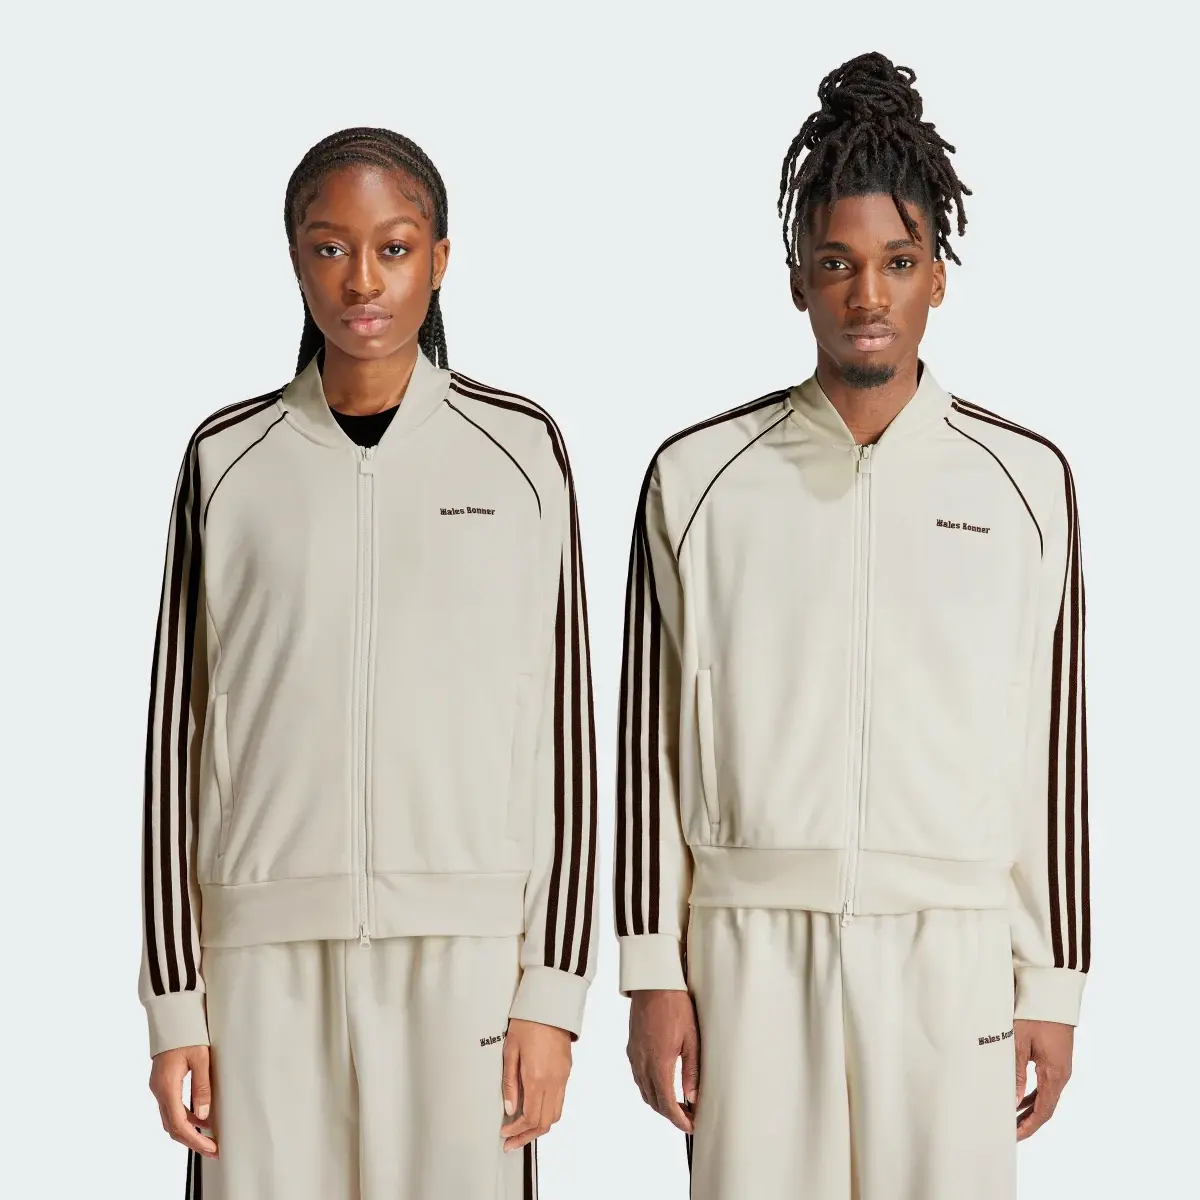 Adidas Track top Wales Bonner Statement. 1